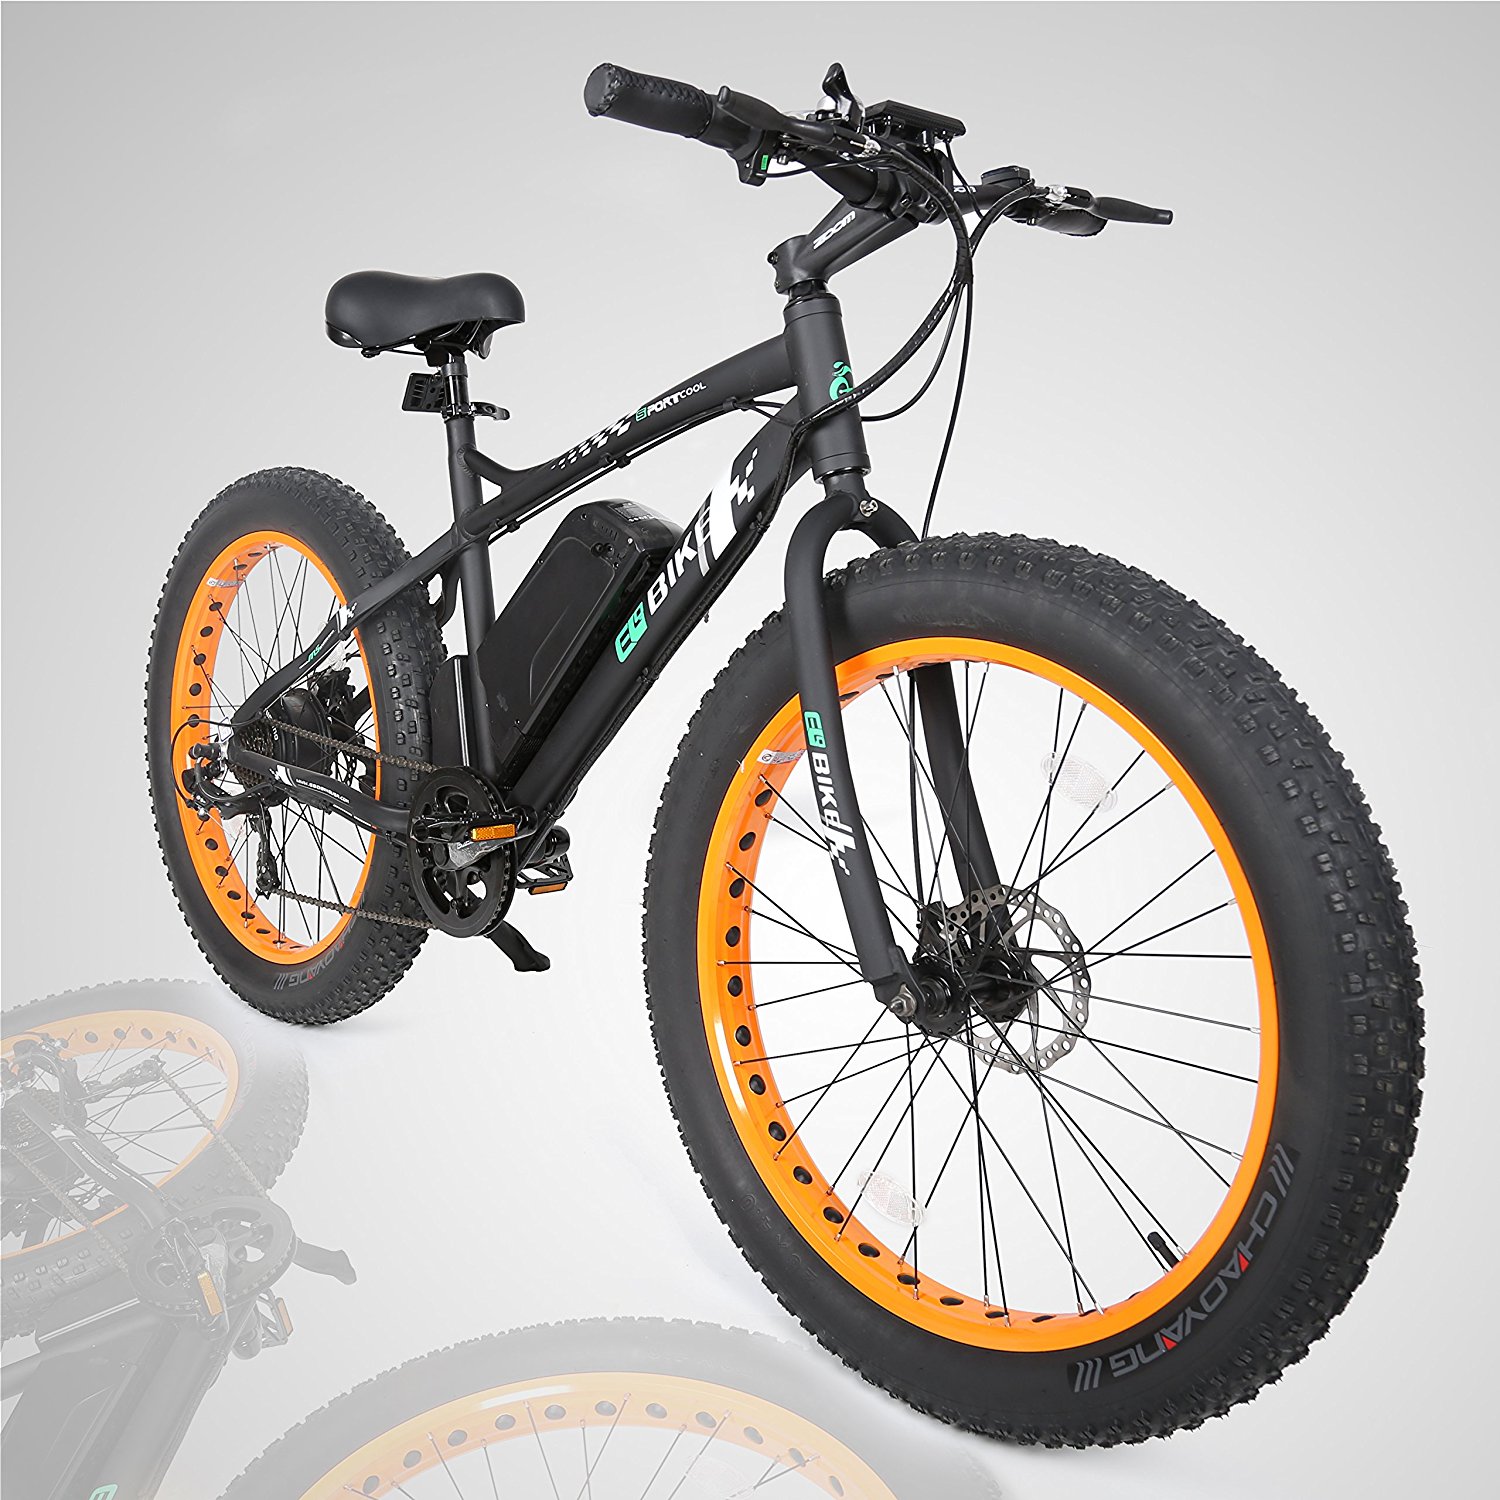 E-go-Fat-Tire-Electric-Bike-Beach-Snow-Bicycle-4.0-inch-Fat-Tire-ebike-500W-Container-Image-3.jpg